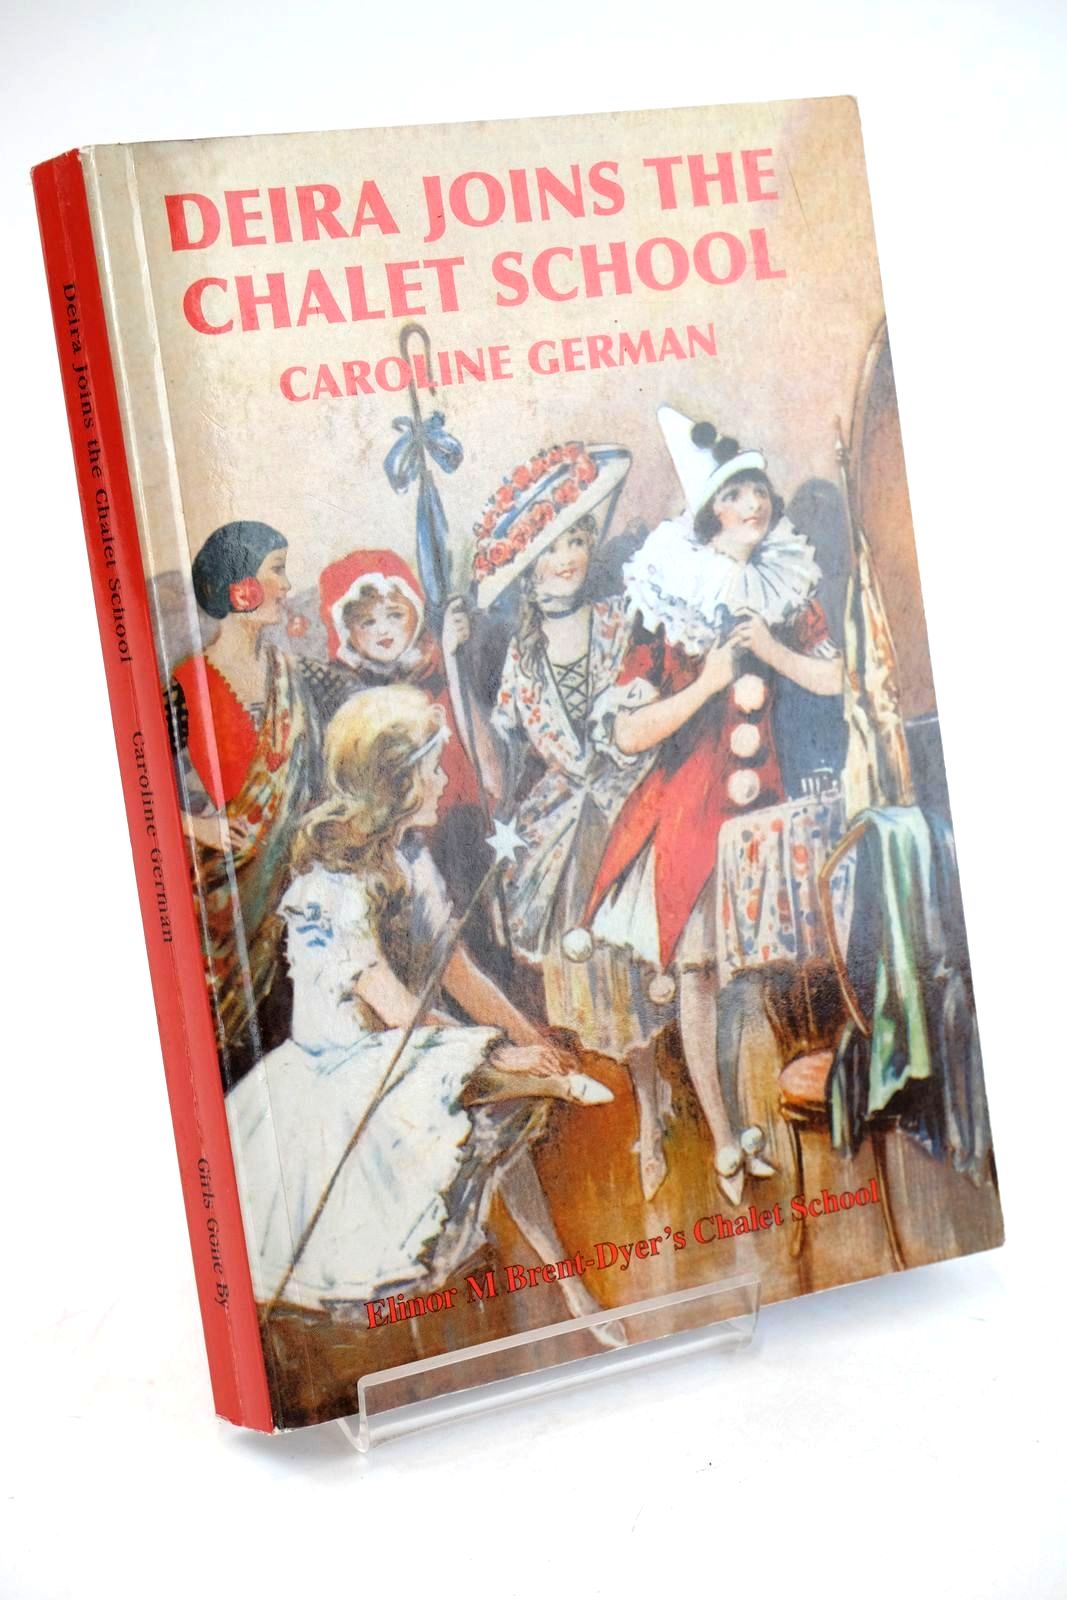 Photo of DEIRA JOINS THE CHALET SCHOOL written by German, Caroline published by Girls Gone By (STOCK CODE: 1324374)  for sale by Stella & Rose's Books